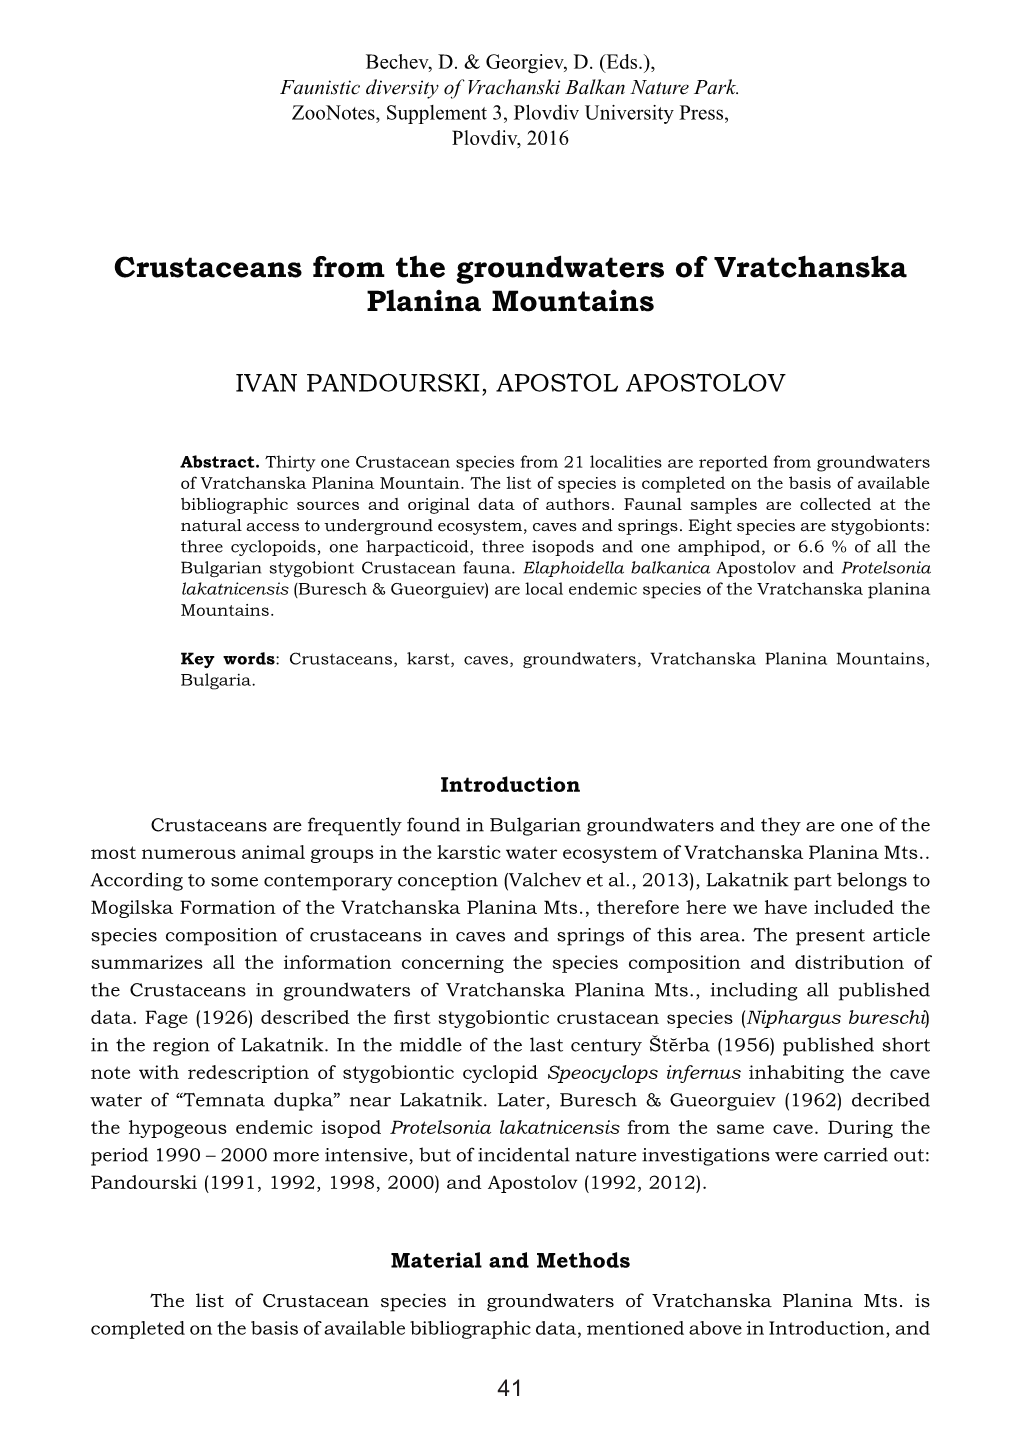 Crustaceans from the Groundwaters of Vratchanska Planina Mountains